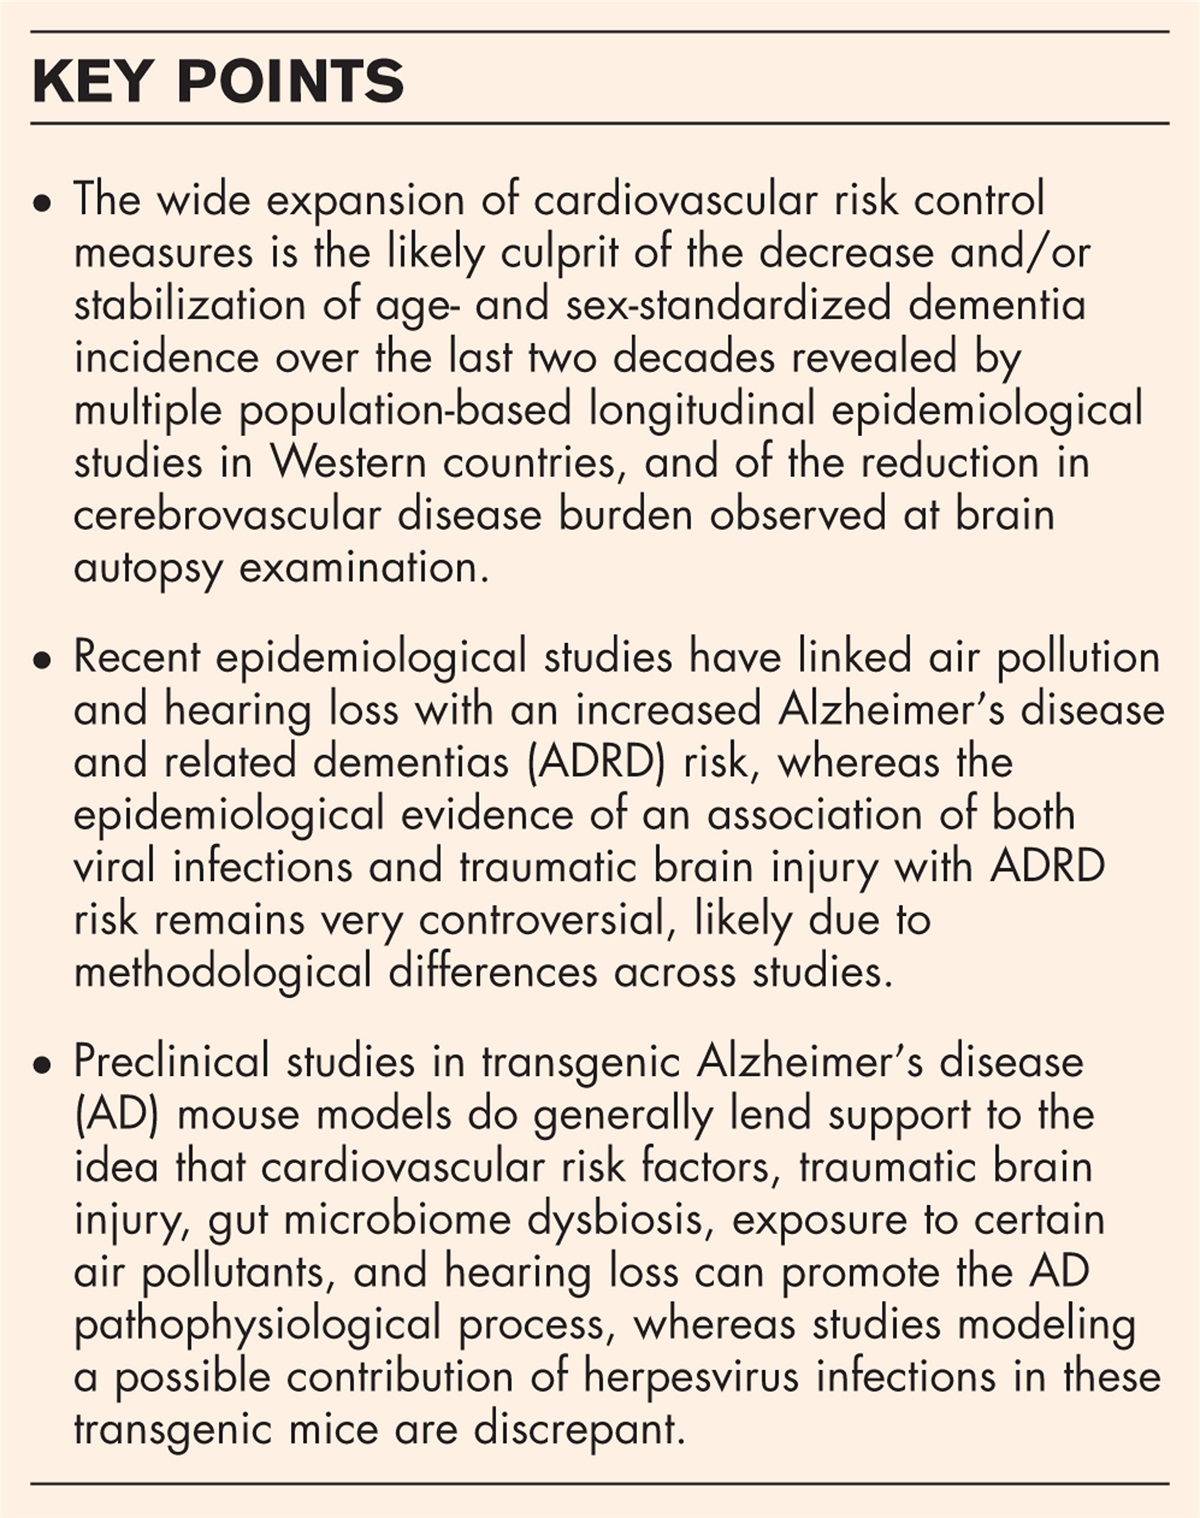 Update on modifiable risk factors for Alzheimer's disease and related dementias